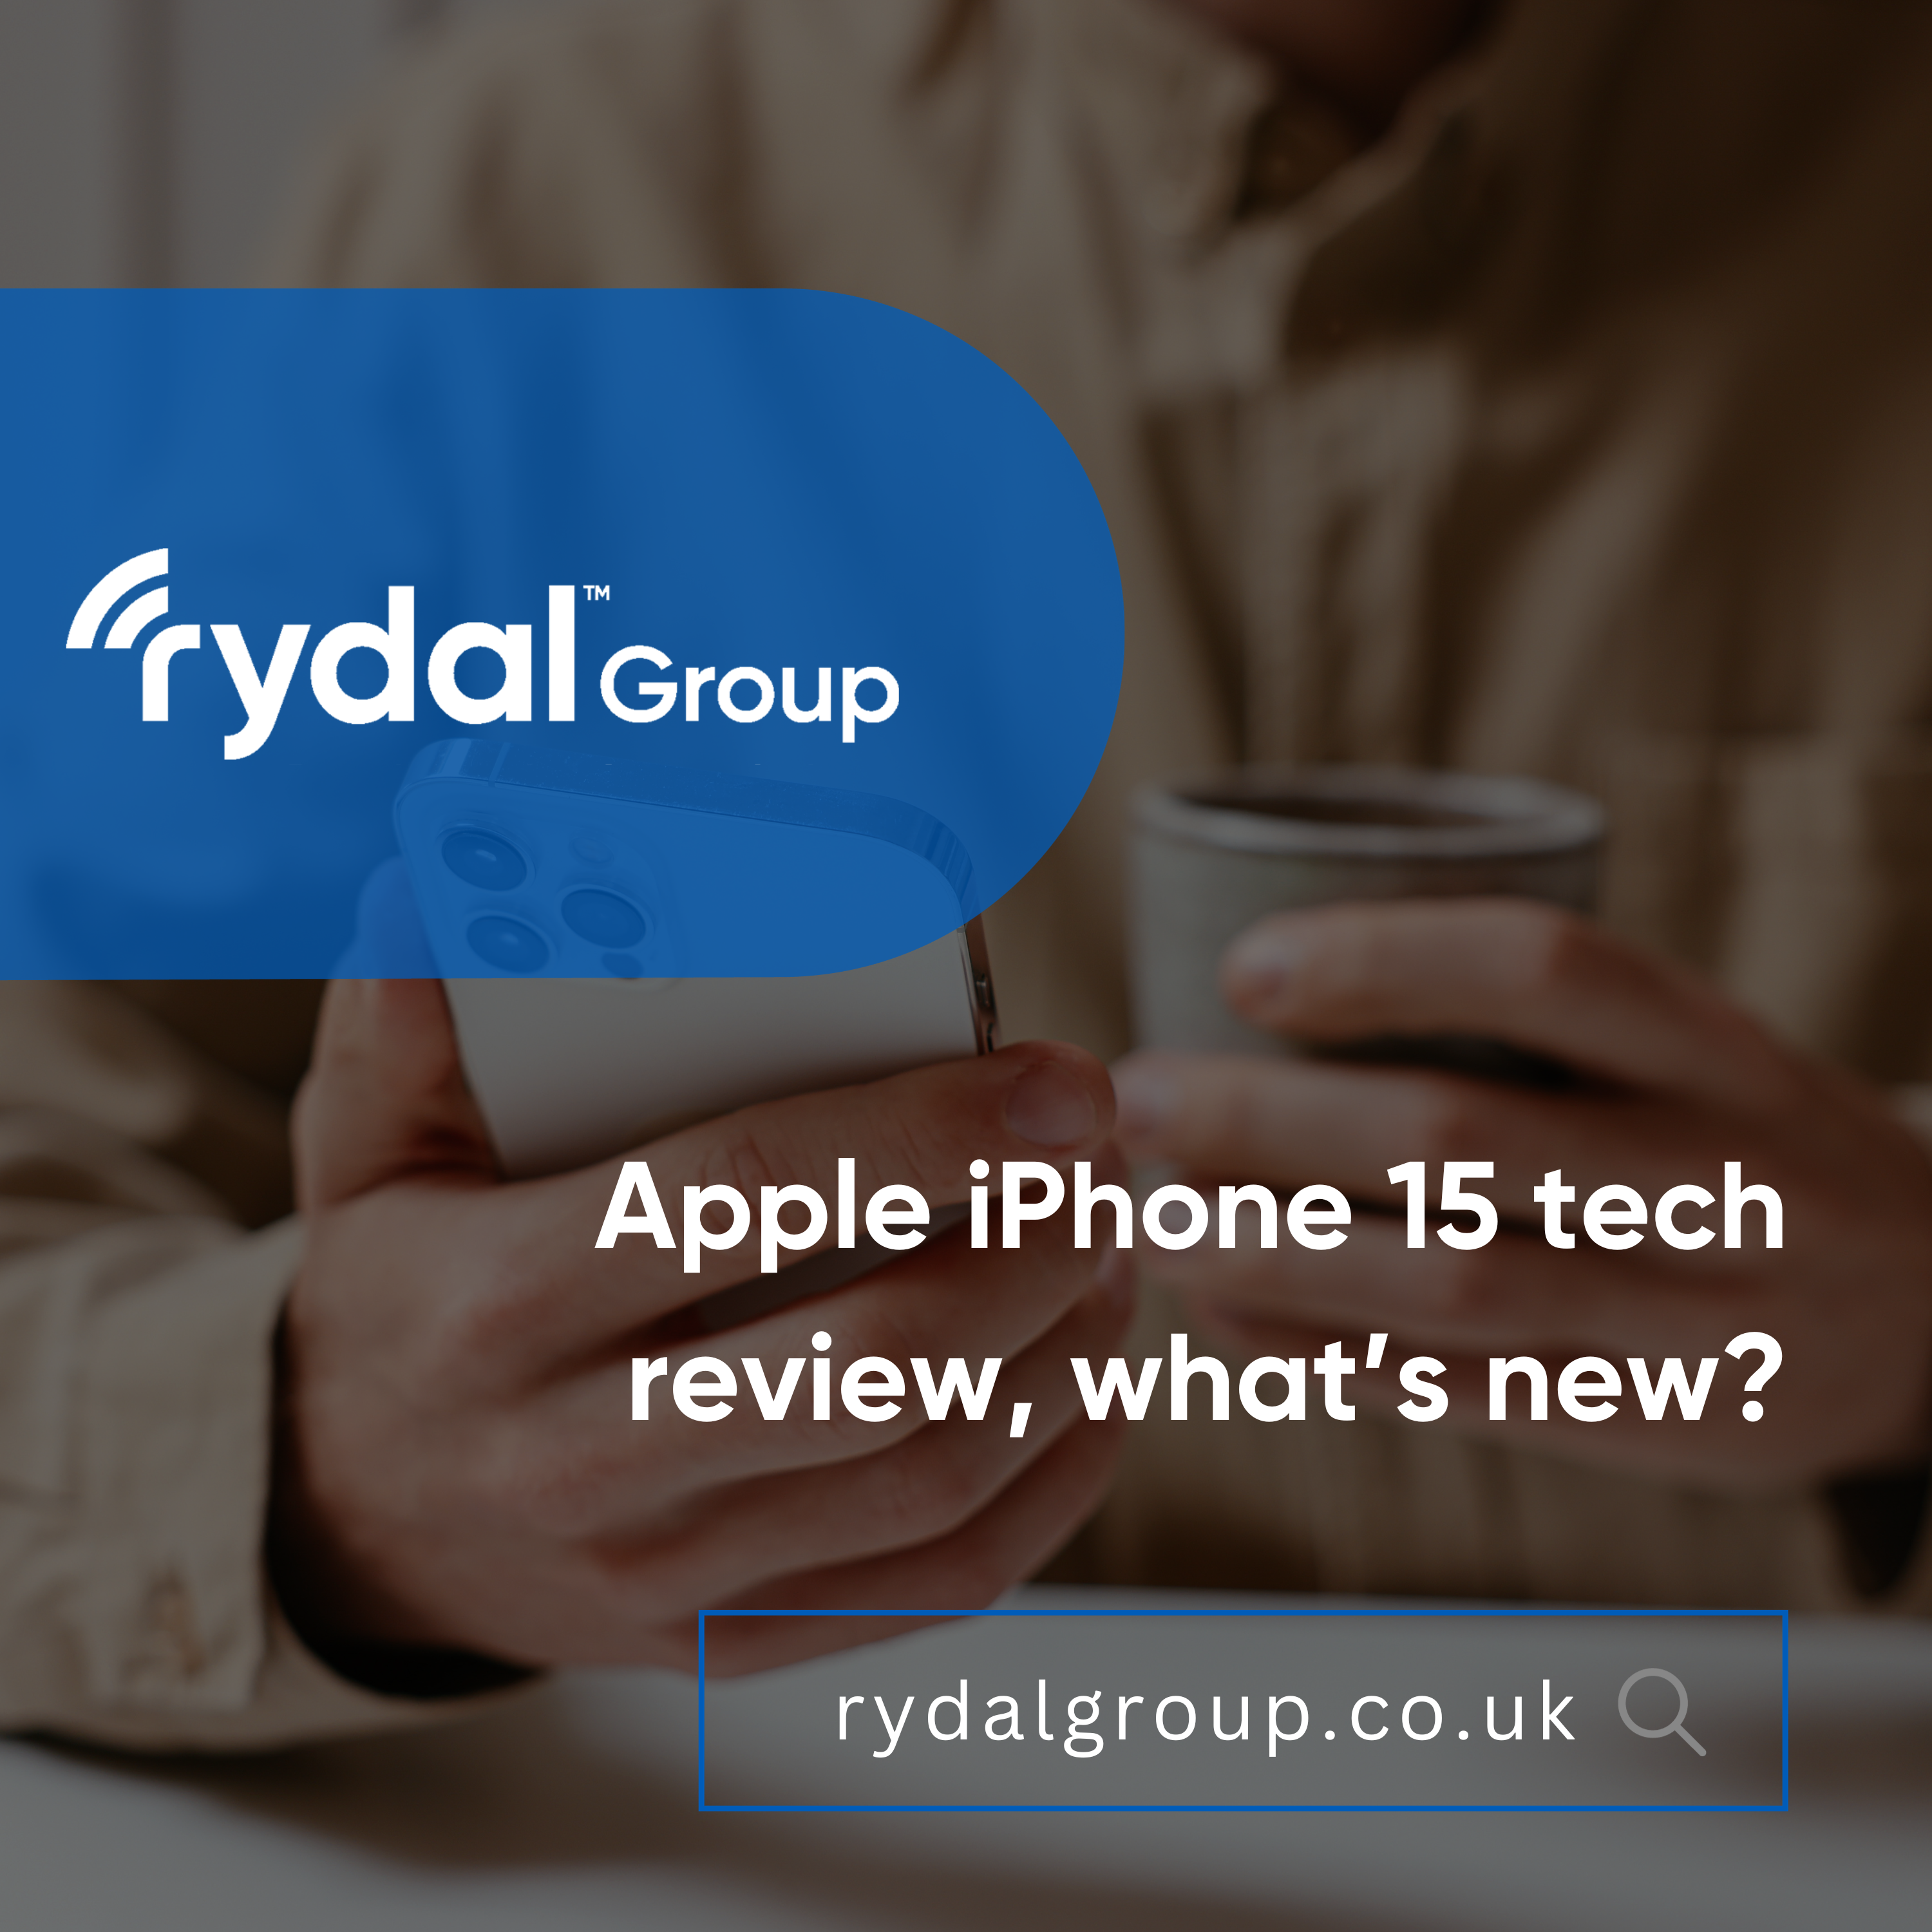 Apple iPhone 15 tech review, what’s new?